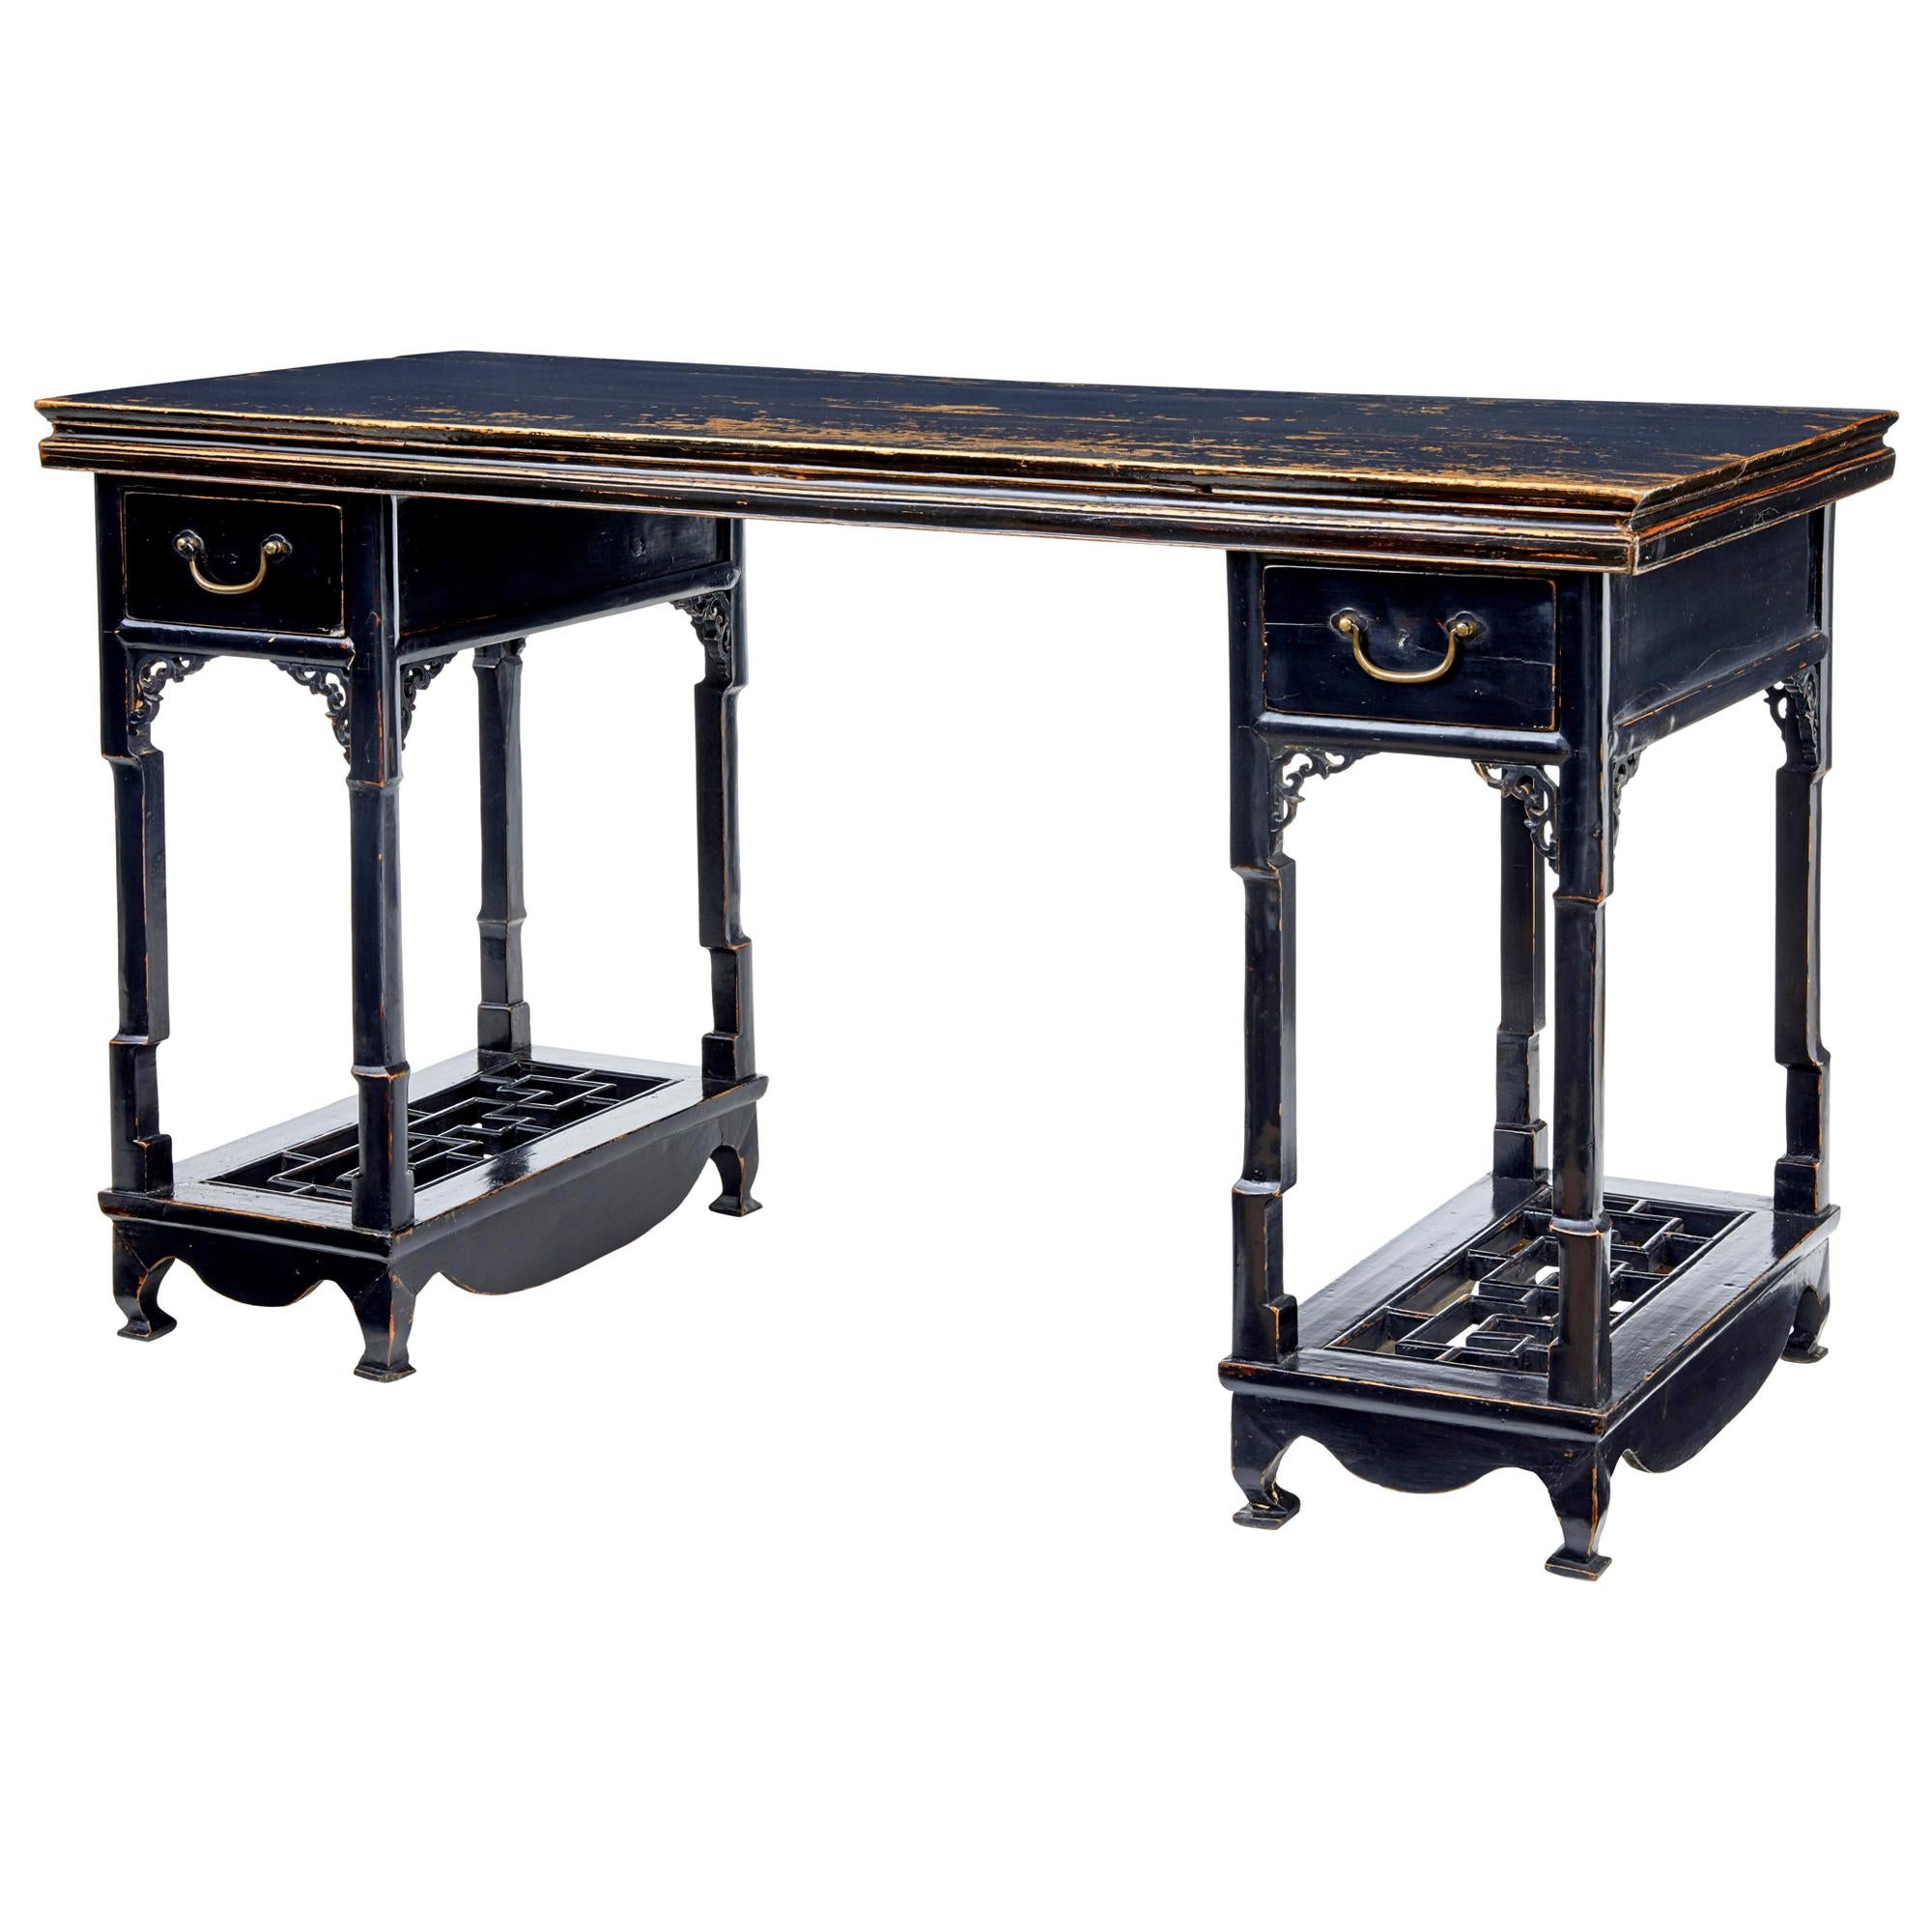 19th Century Chinese Black Lacquered Desk